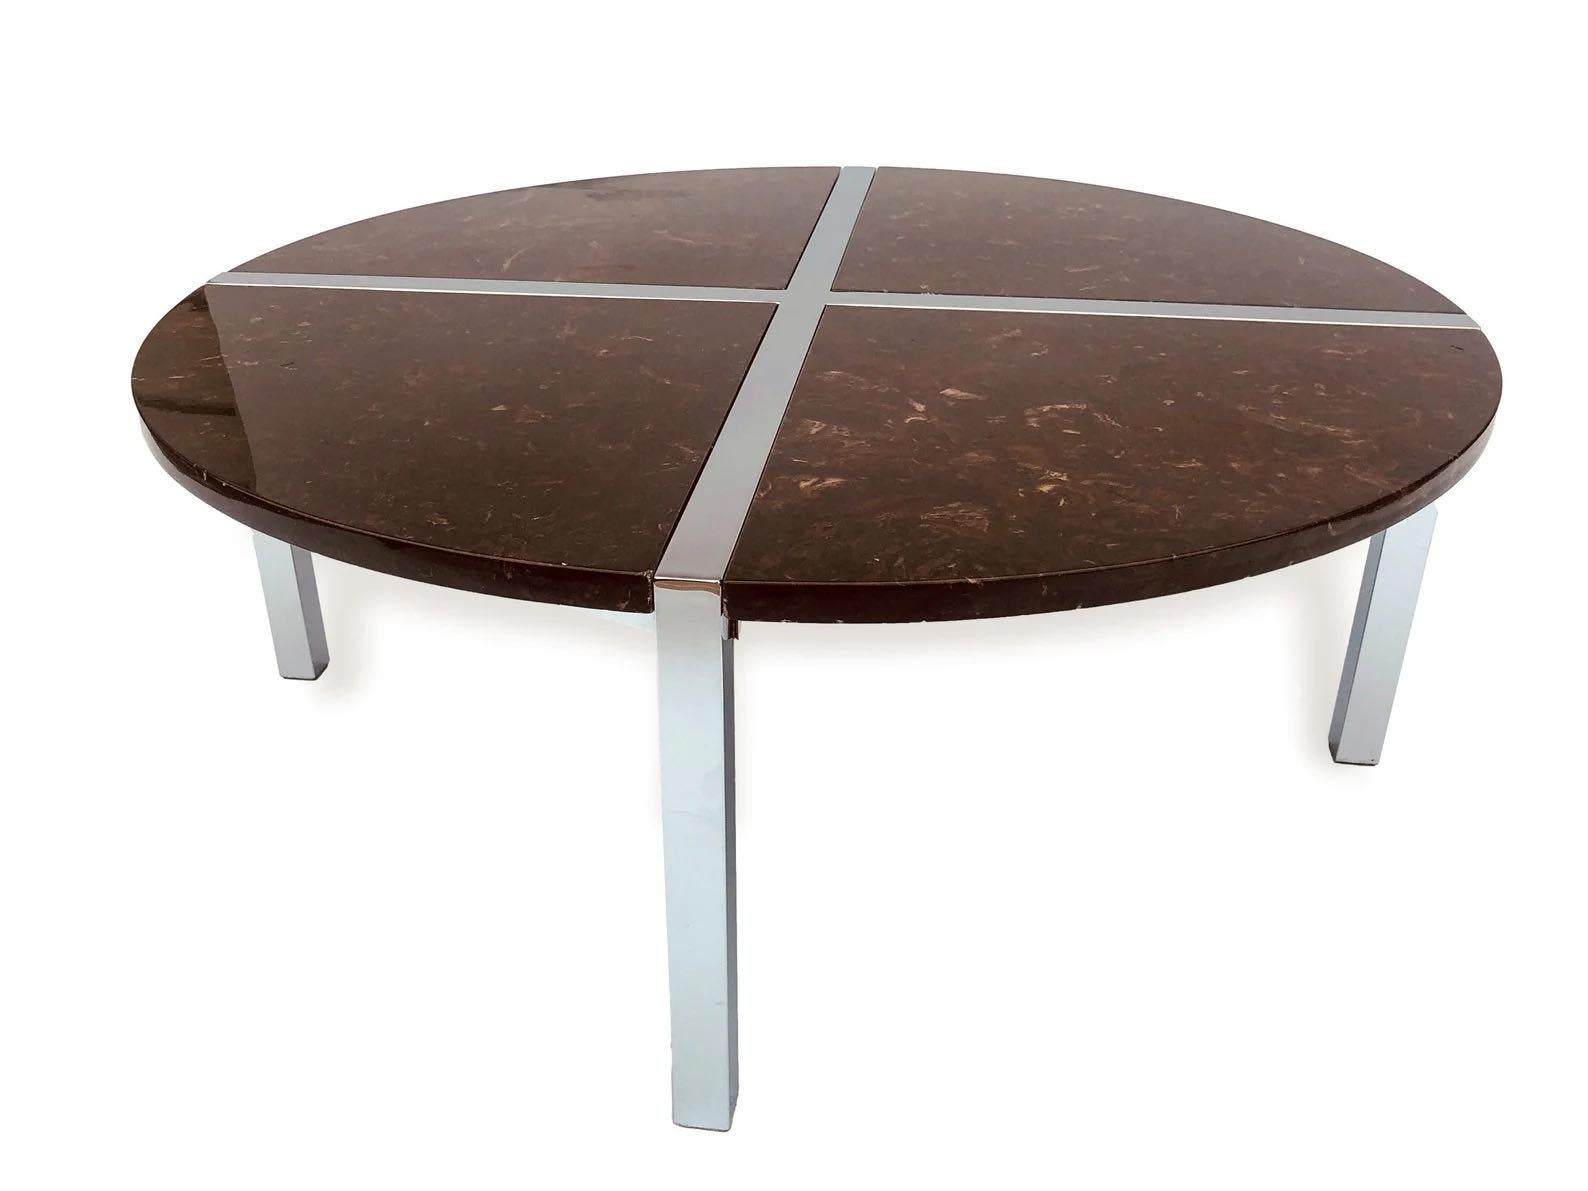 This incredibly unique vintage Mid-Century Modern chrome and marbled resin round coffee table in the style of Milo Baughman is circa 1970. The sleek design features a chrome-plated silver frame with brown marbled resin pie-shaped inserts. The table